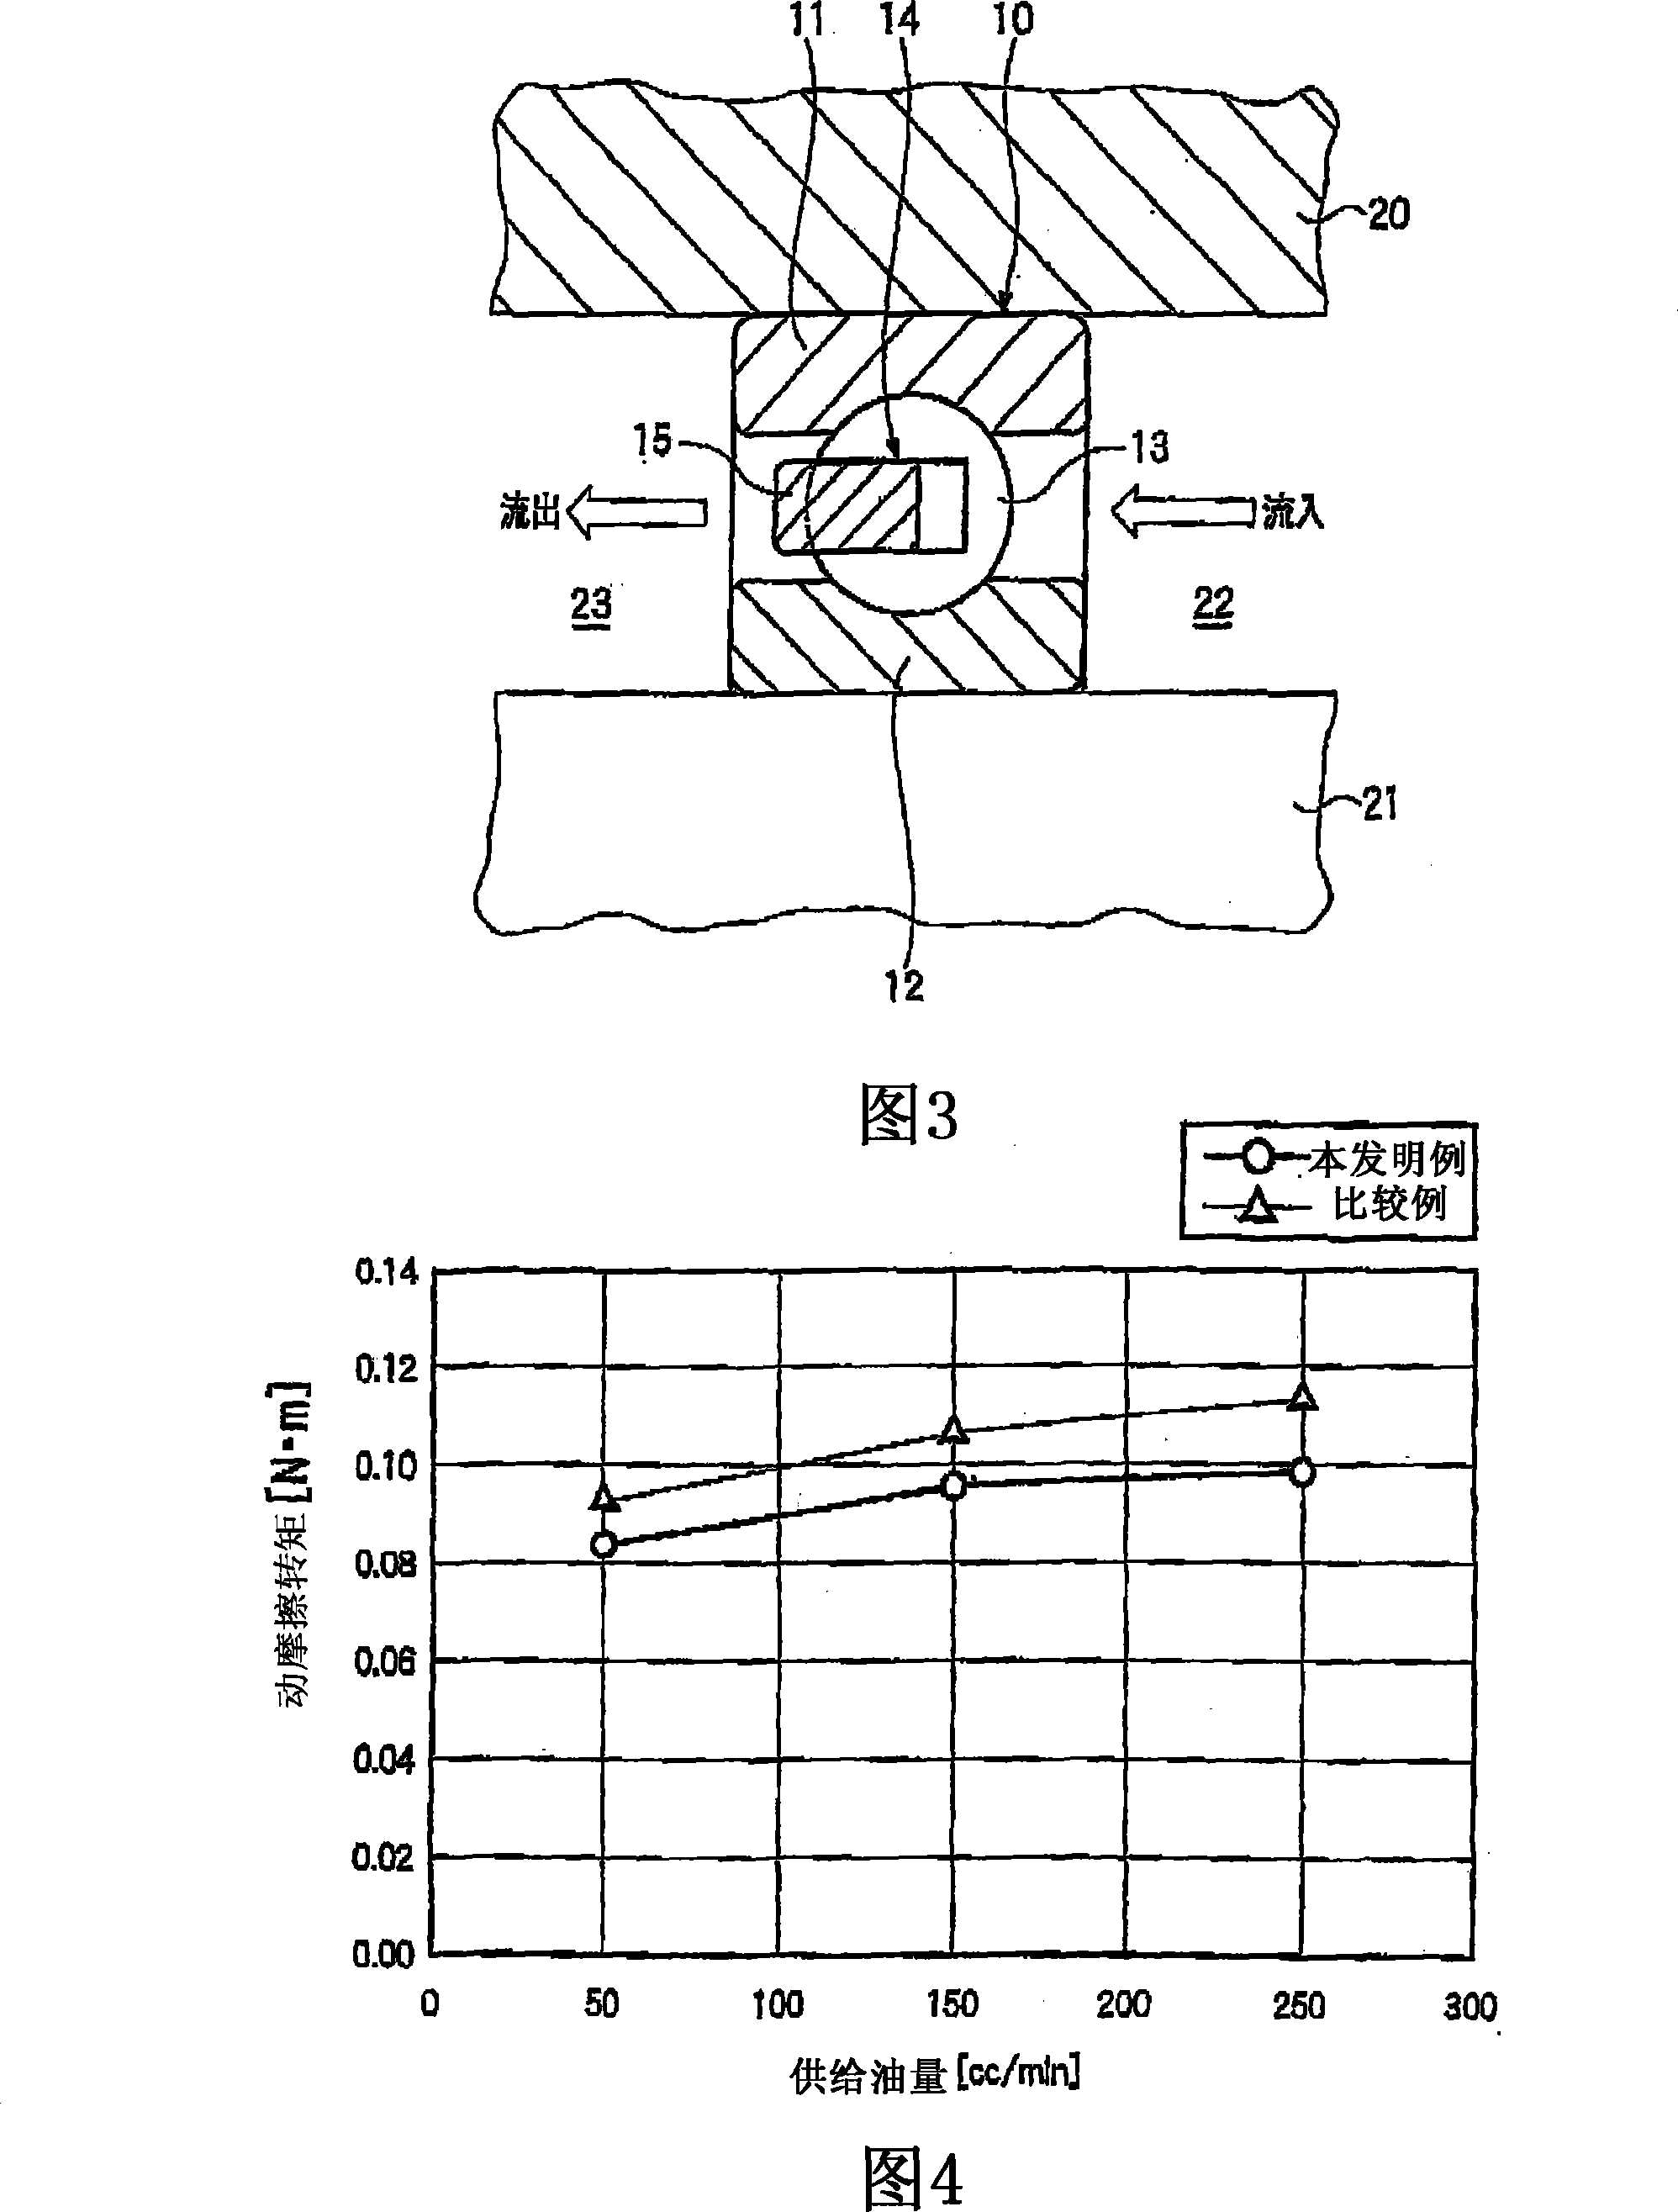 Ball bearing and supporting construction